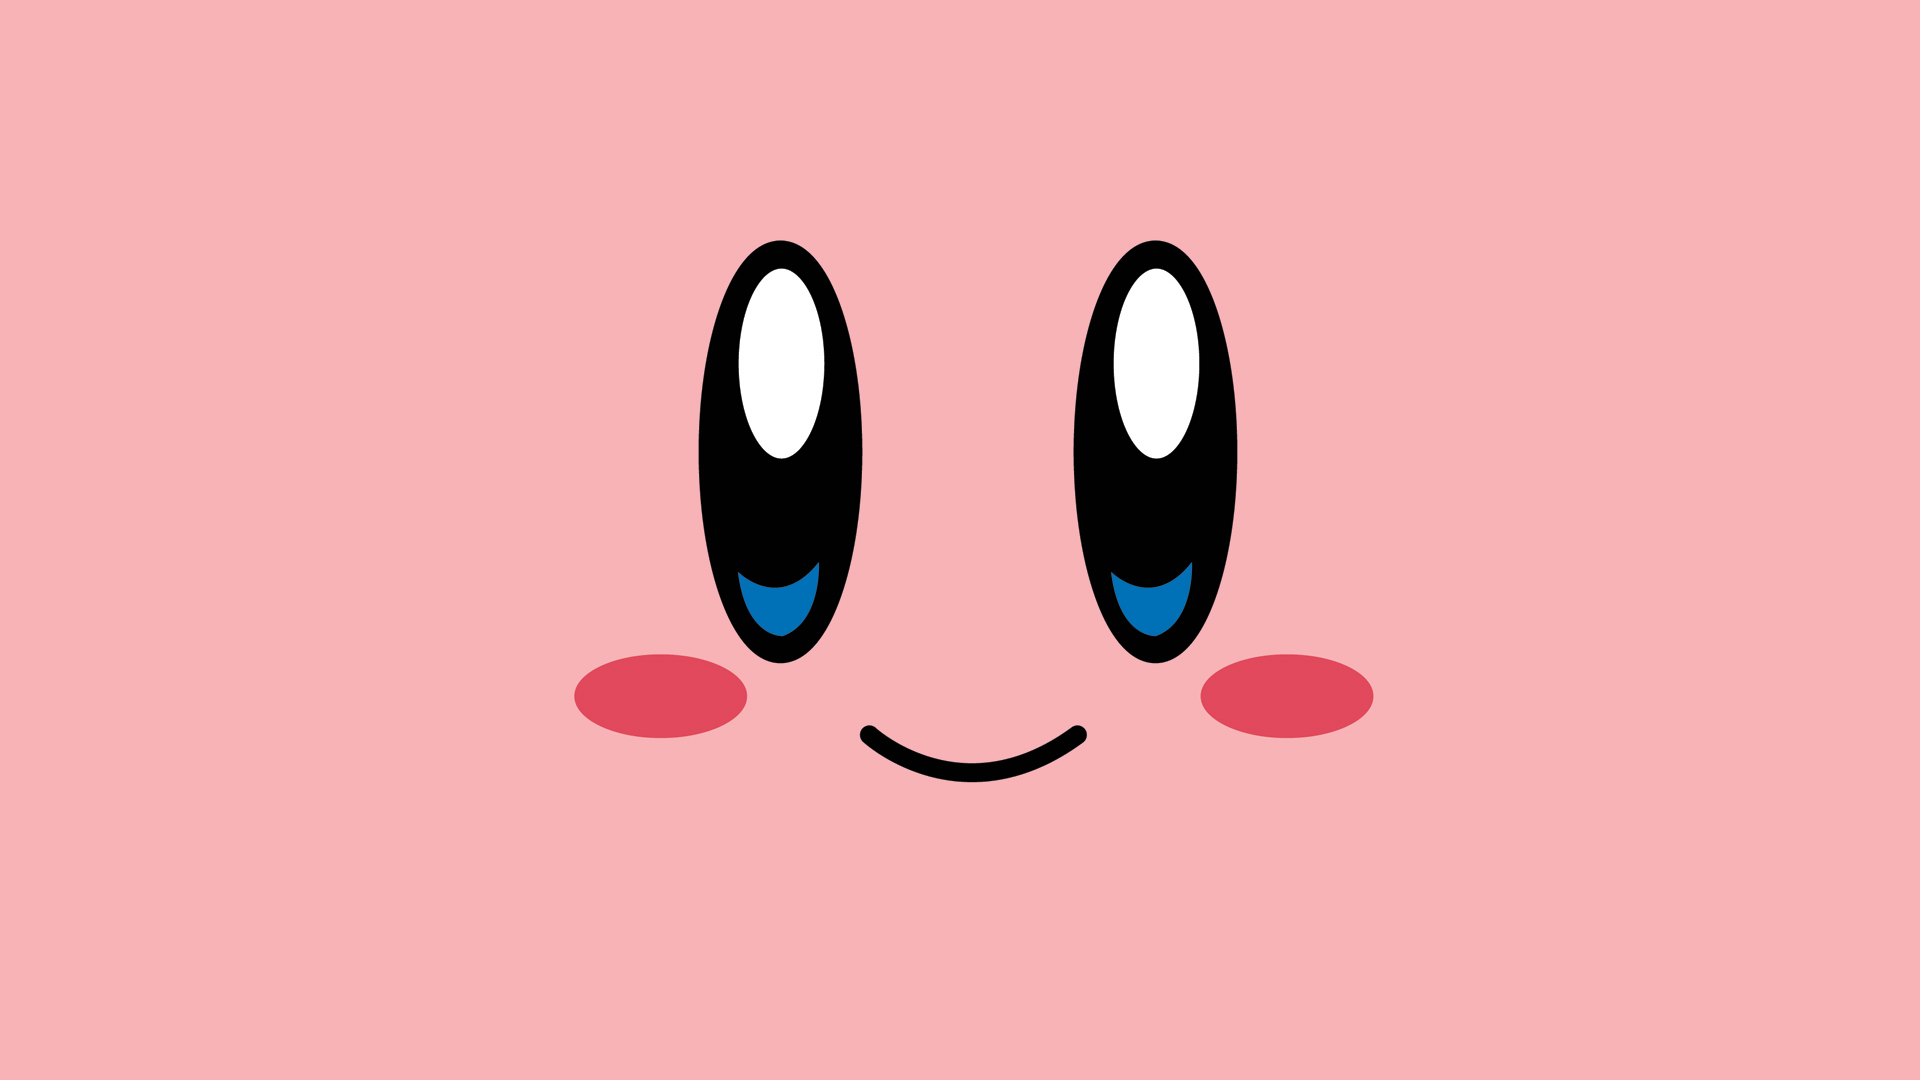 General 1920x1080 Kirby minimalism face pink background pink video games video game characters